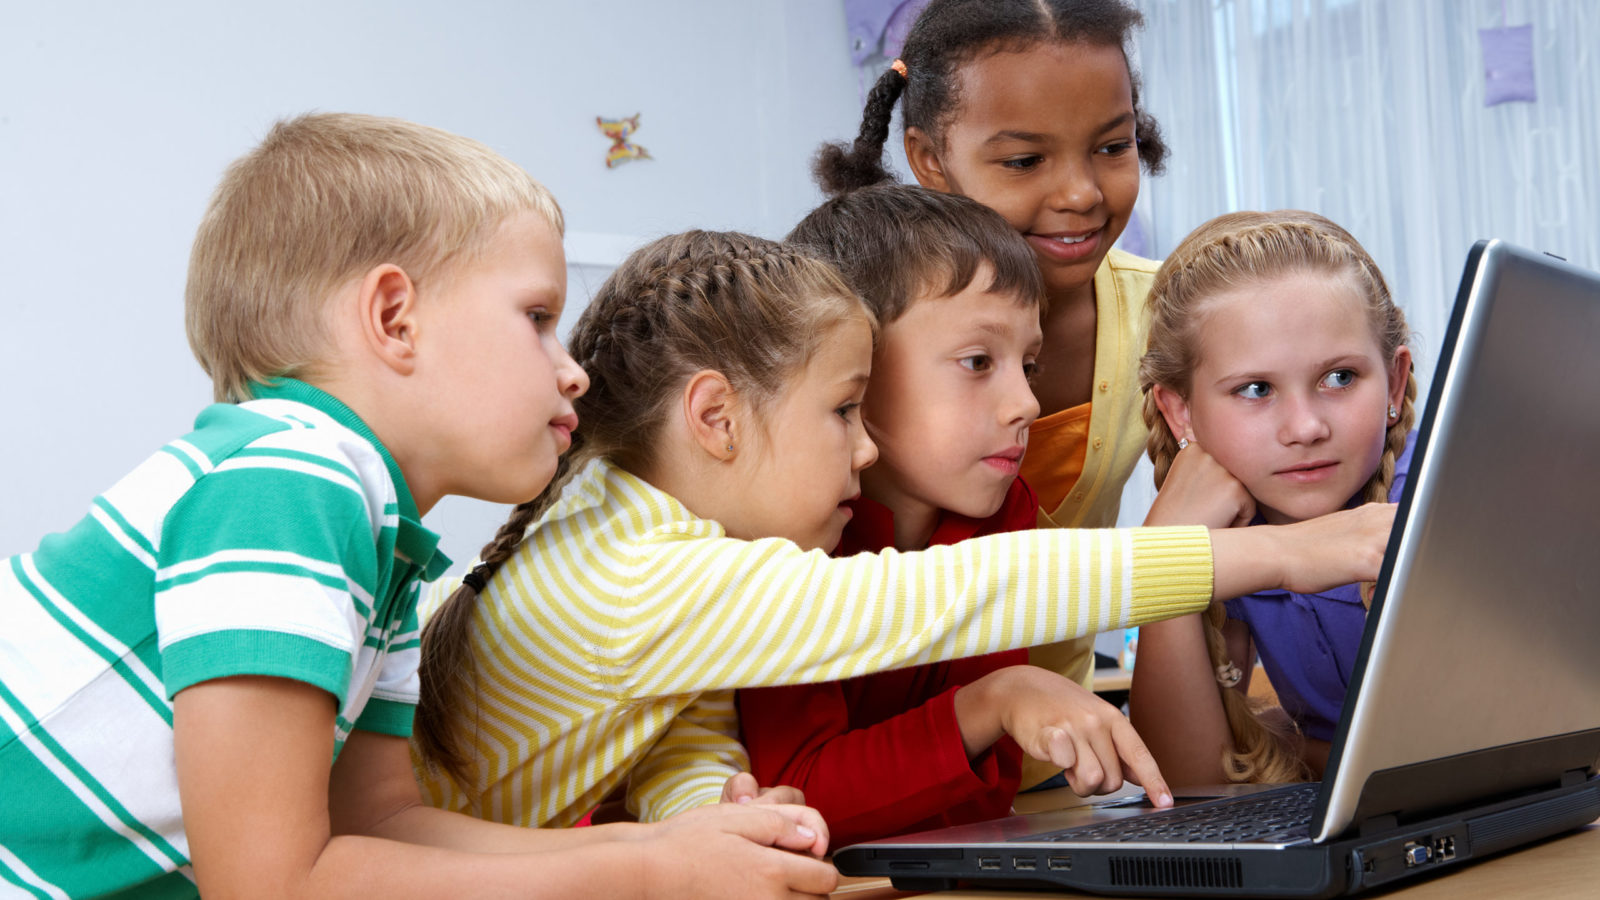 Portrait of elementary school students gathered around a laptop.